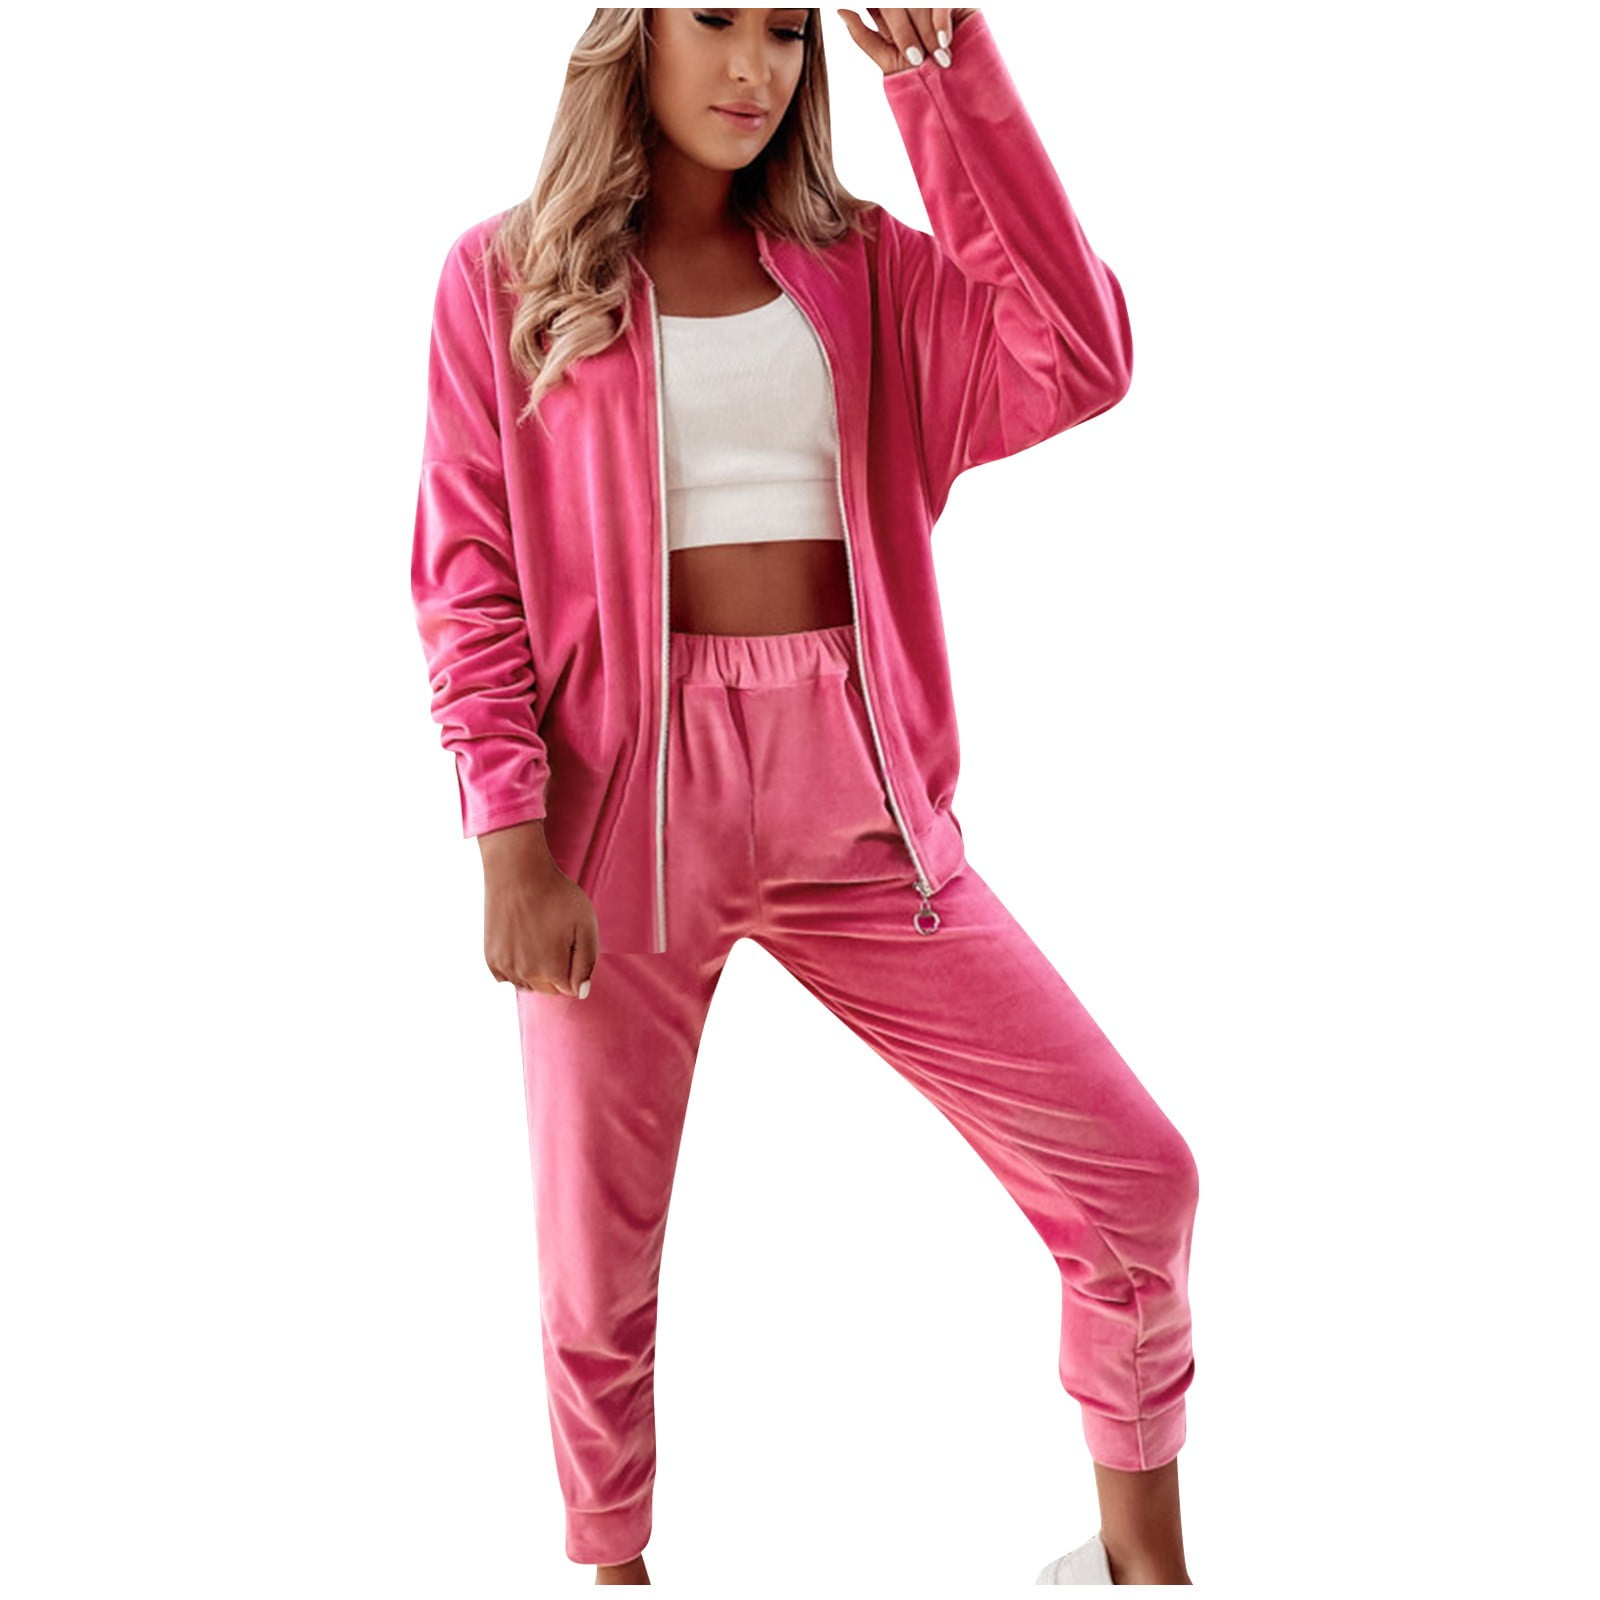 Top Track Suit Manufacturers in Ved Road - Best TrackSuits